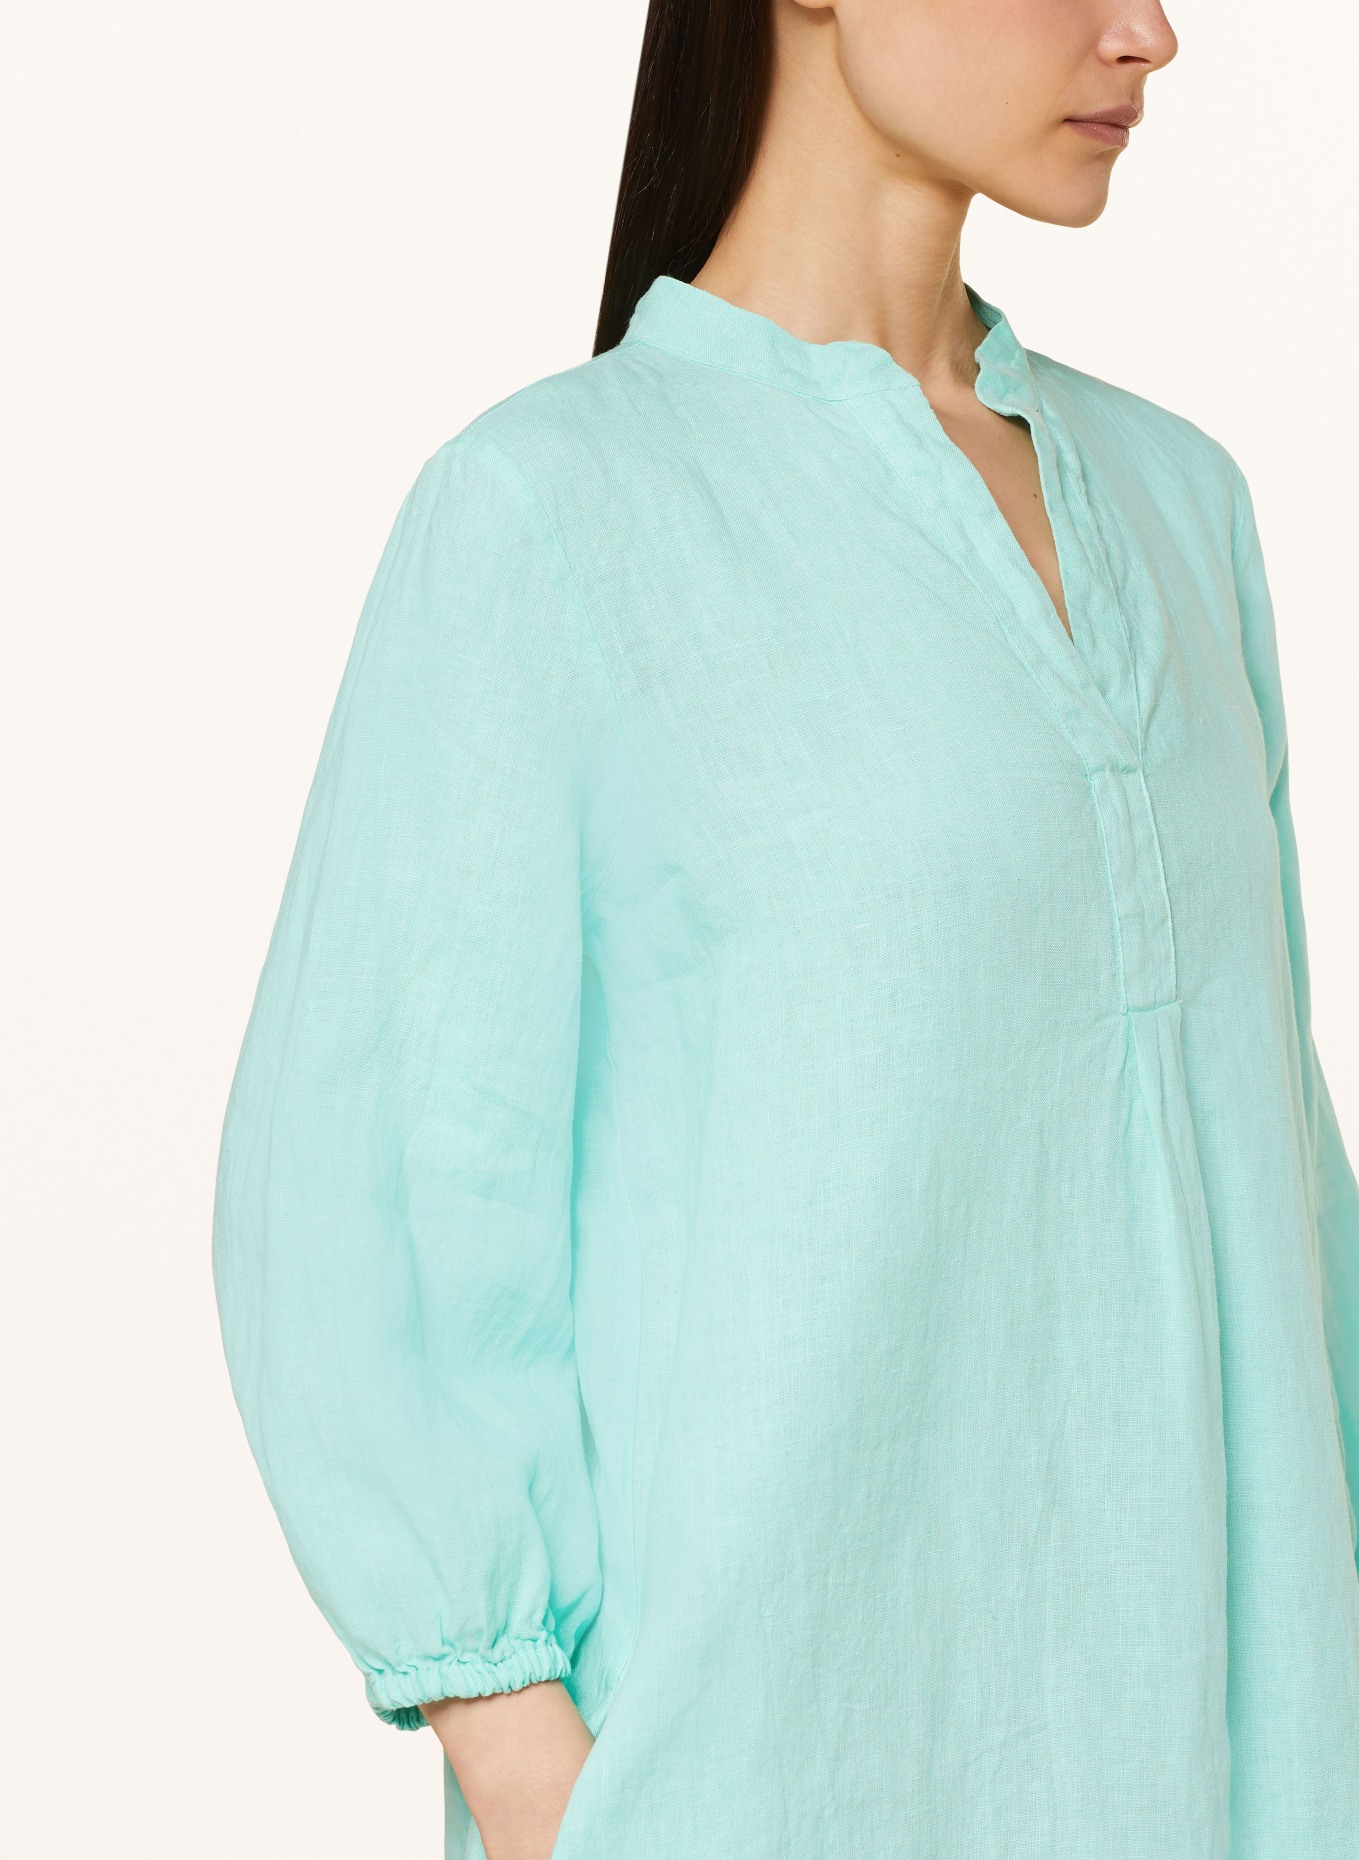 Backstage Linen dress BLANCHE with 3/4 sleeves, Color: MINT (Image 4)